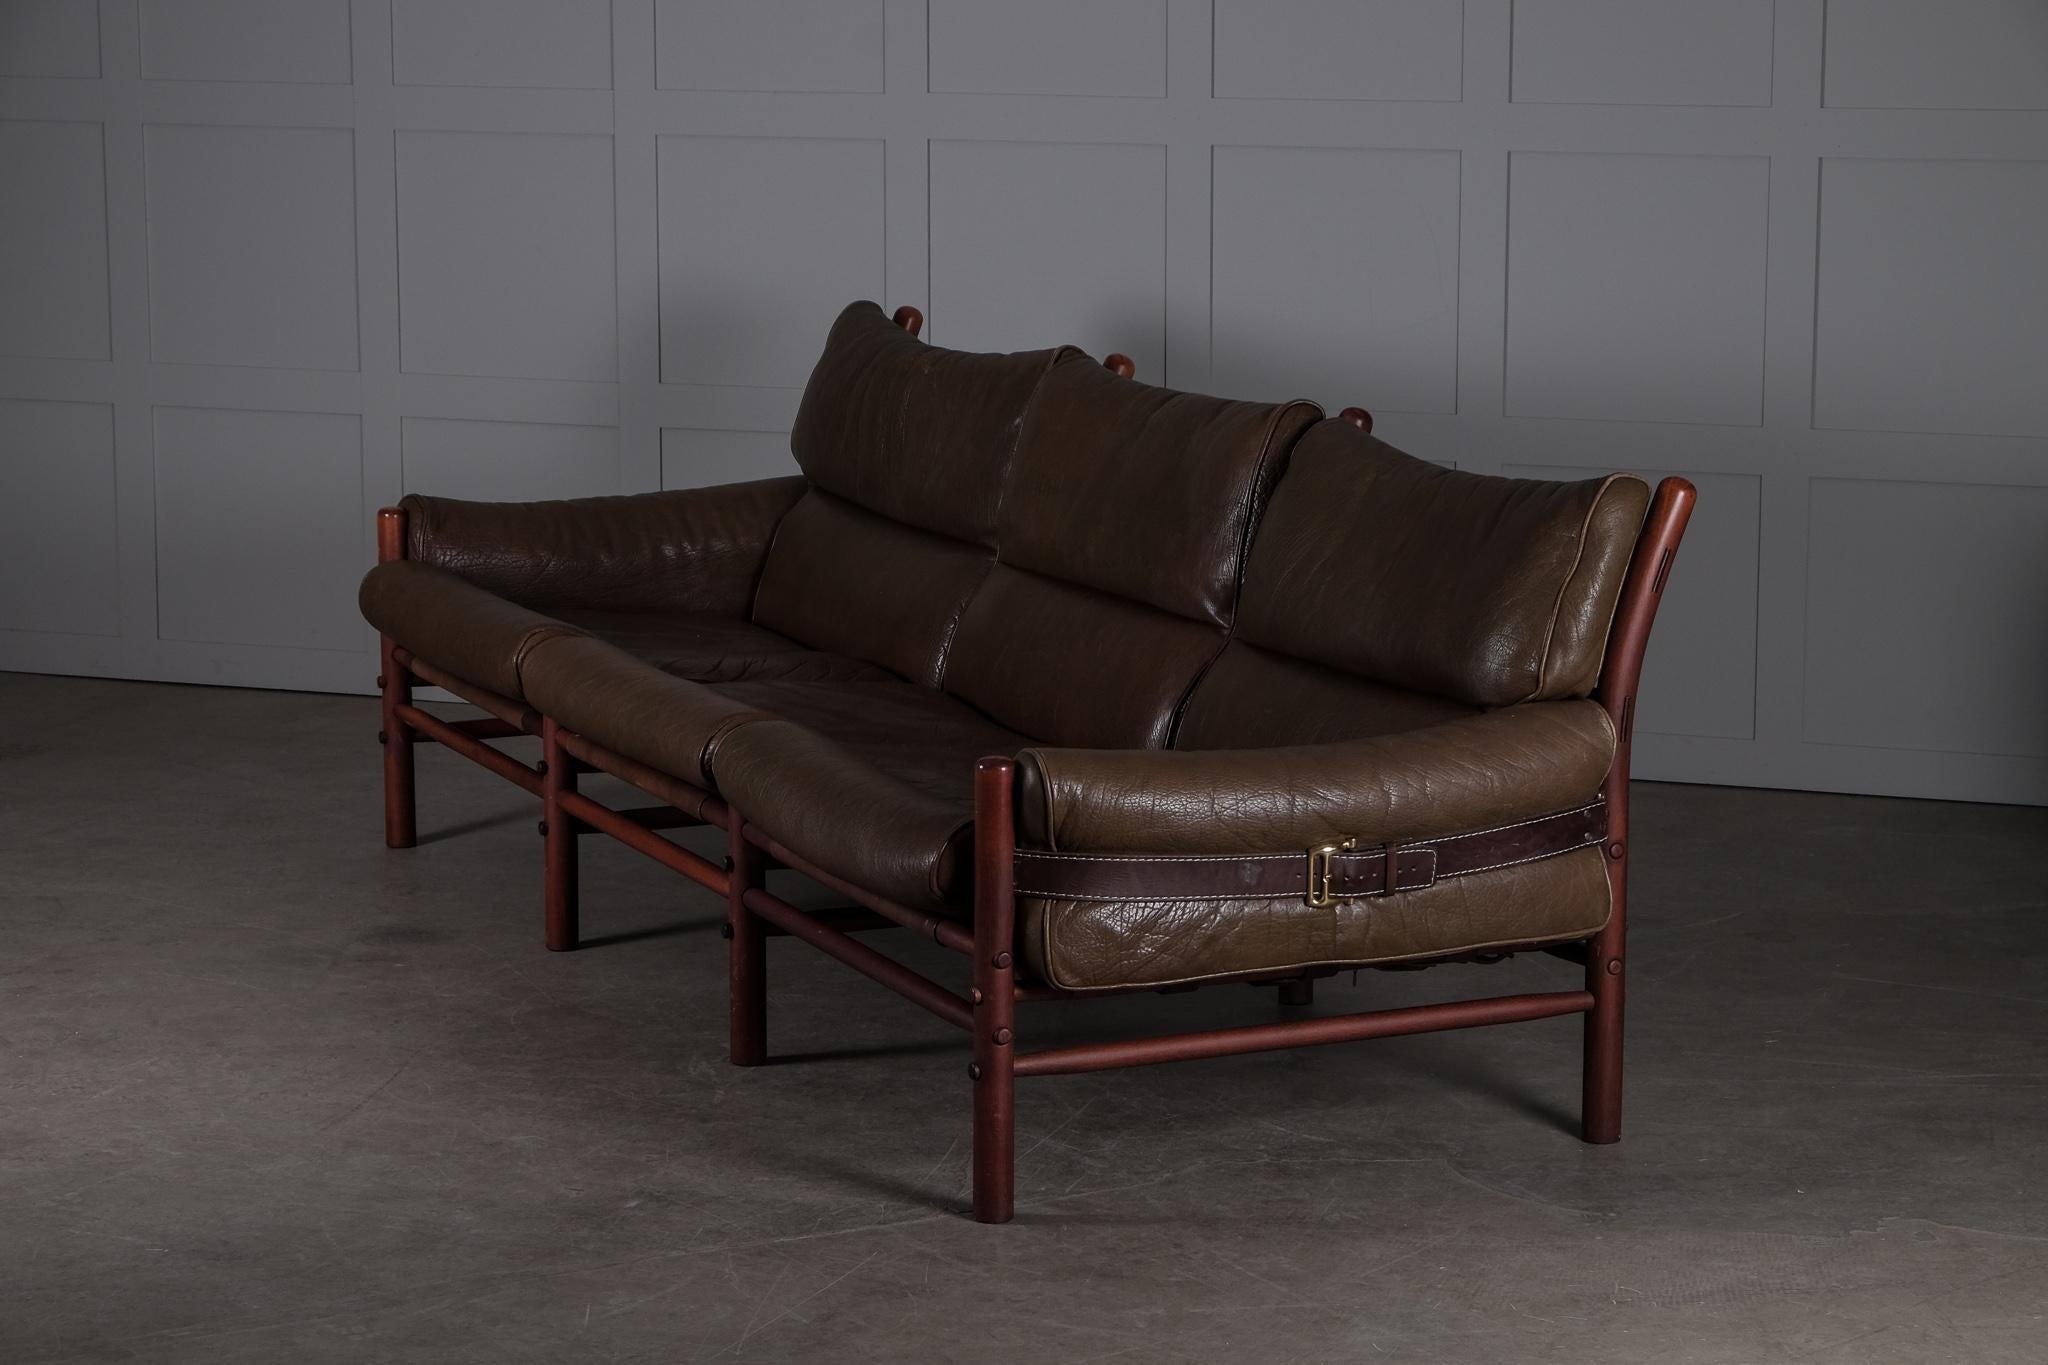 3-seater sofa model Kontiki designed by Arne Norell in original brown leather. Produced by Arne Norell AB in Aneby, Sweden.
Very good condition!
  